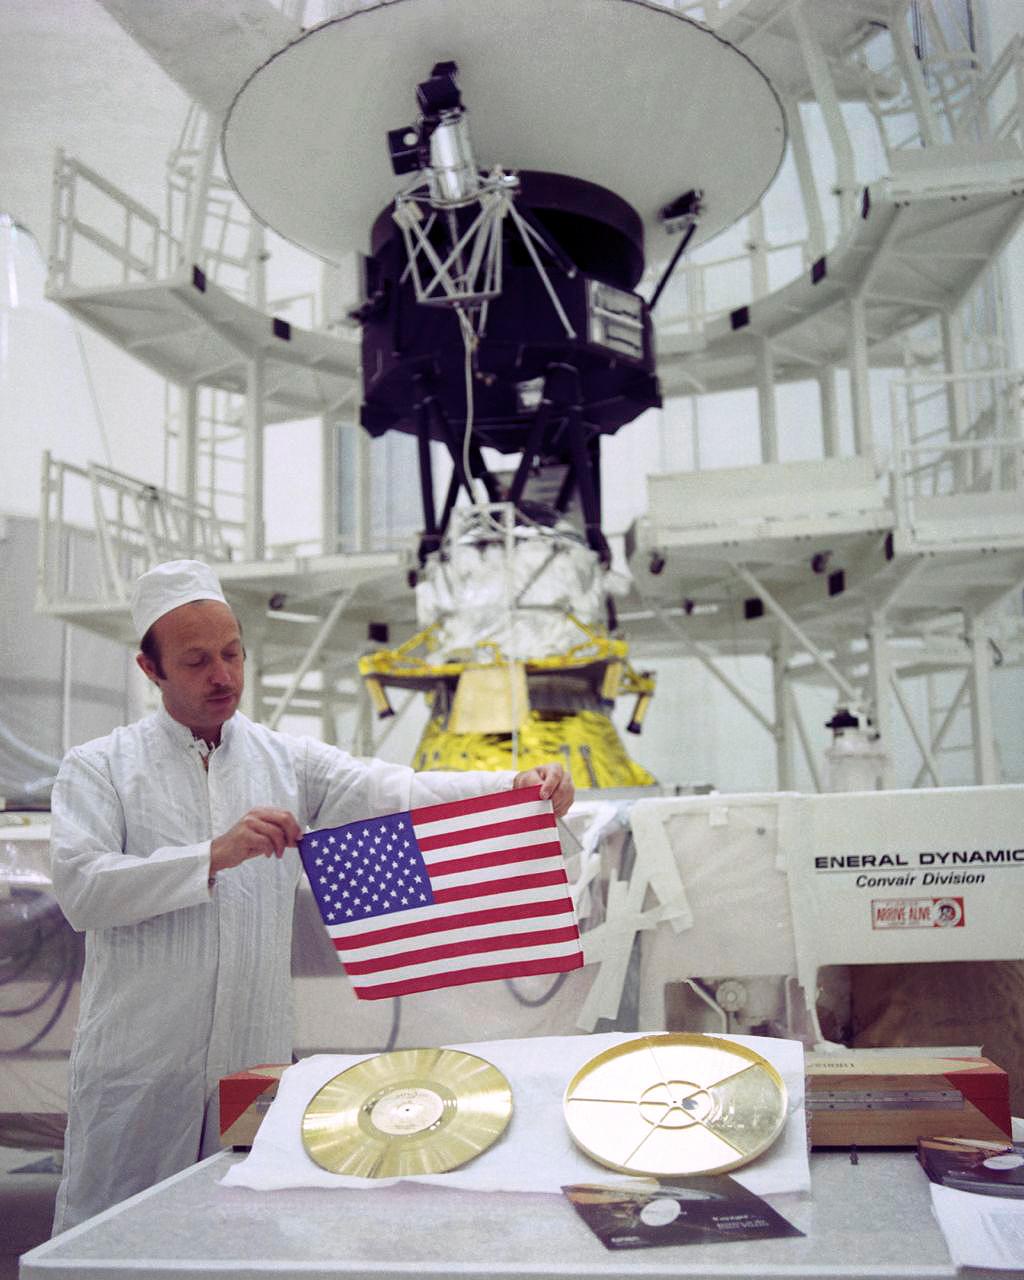 John Casani, Voyager project manager in 1977, holding a small Dacron flag that was folded and sewed into the thermal blankets of the Voyager spacecraft before they launched 36 years ago. Below him lie the Golden Record (left) and its cover (right). In the background stands Voyager 2 before it headed to the launch pad.